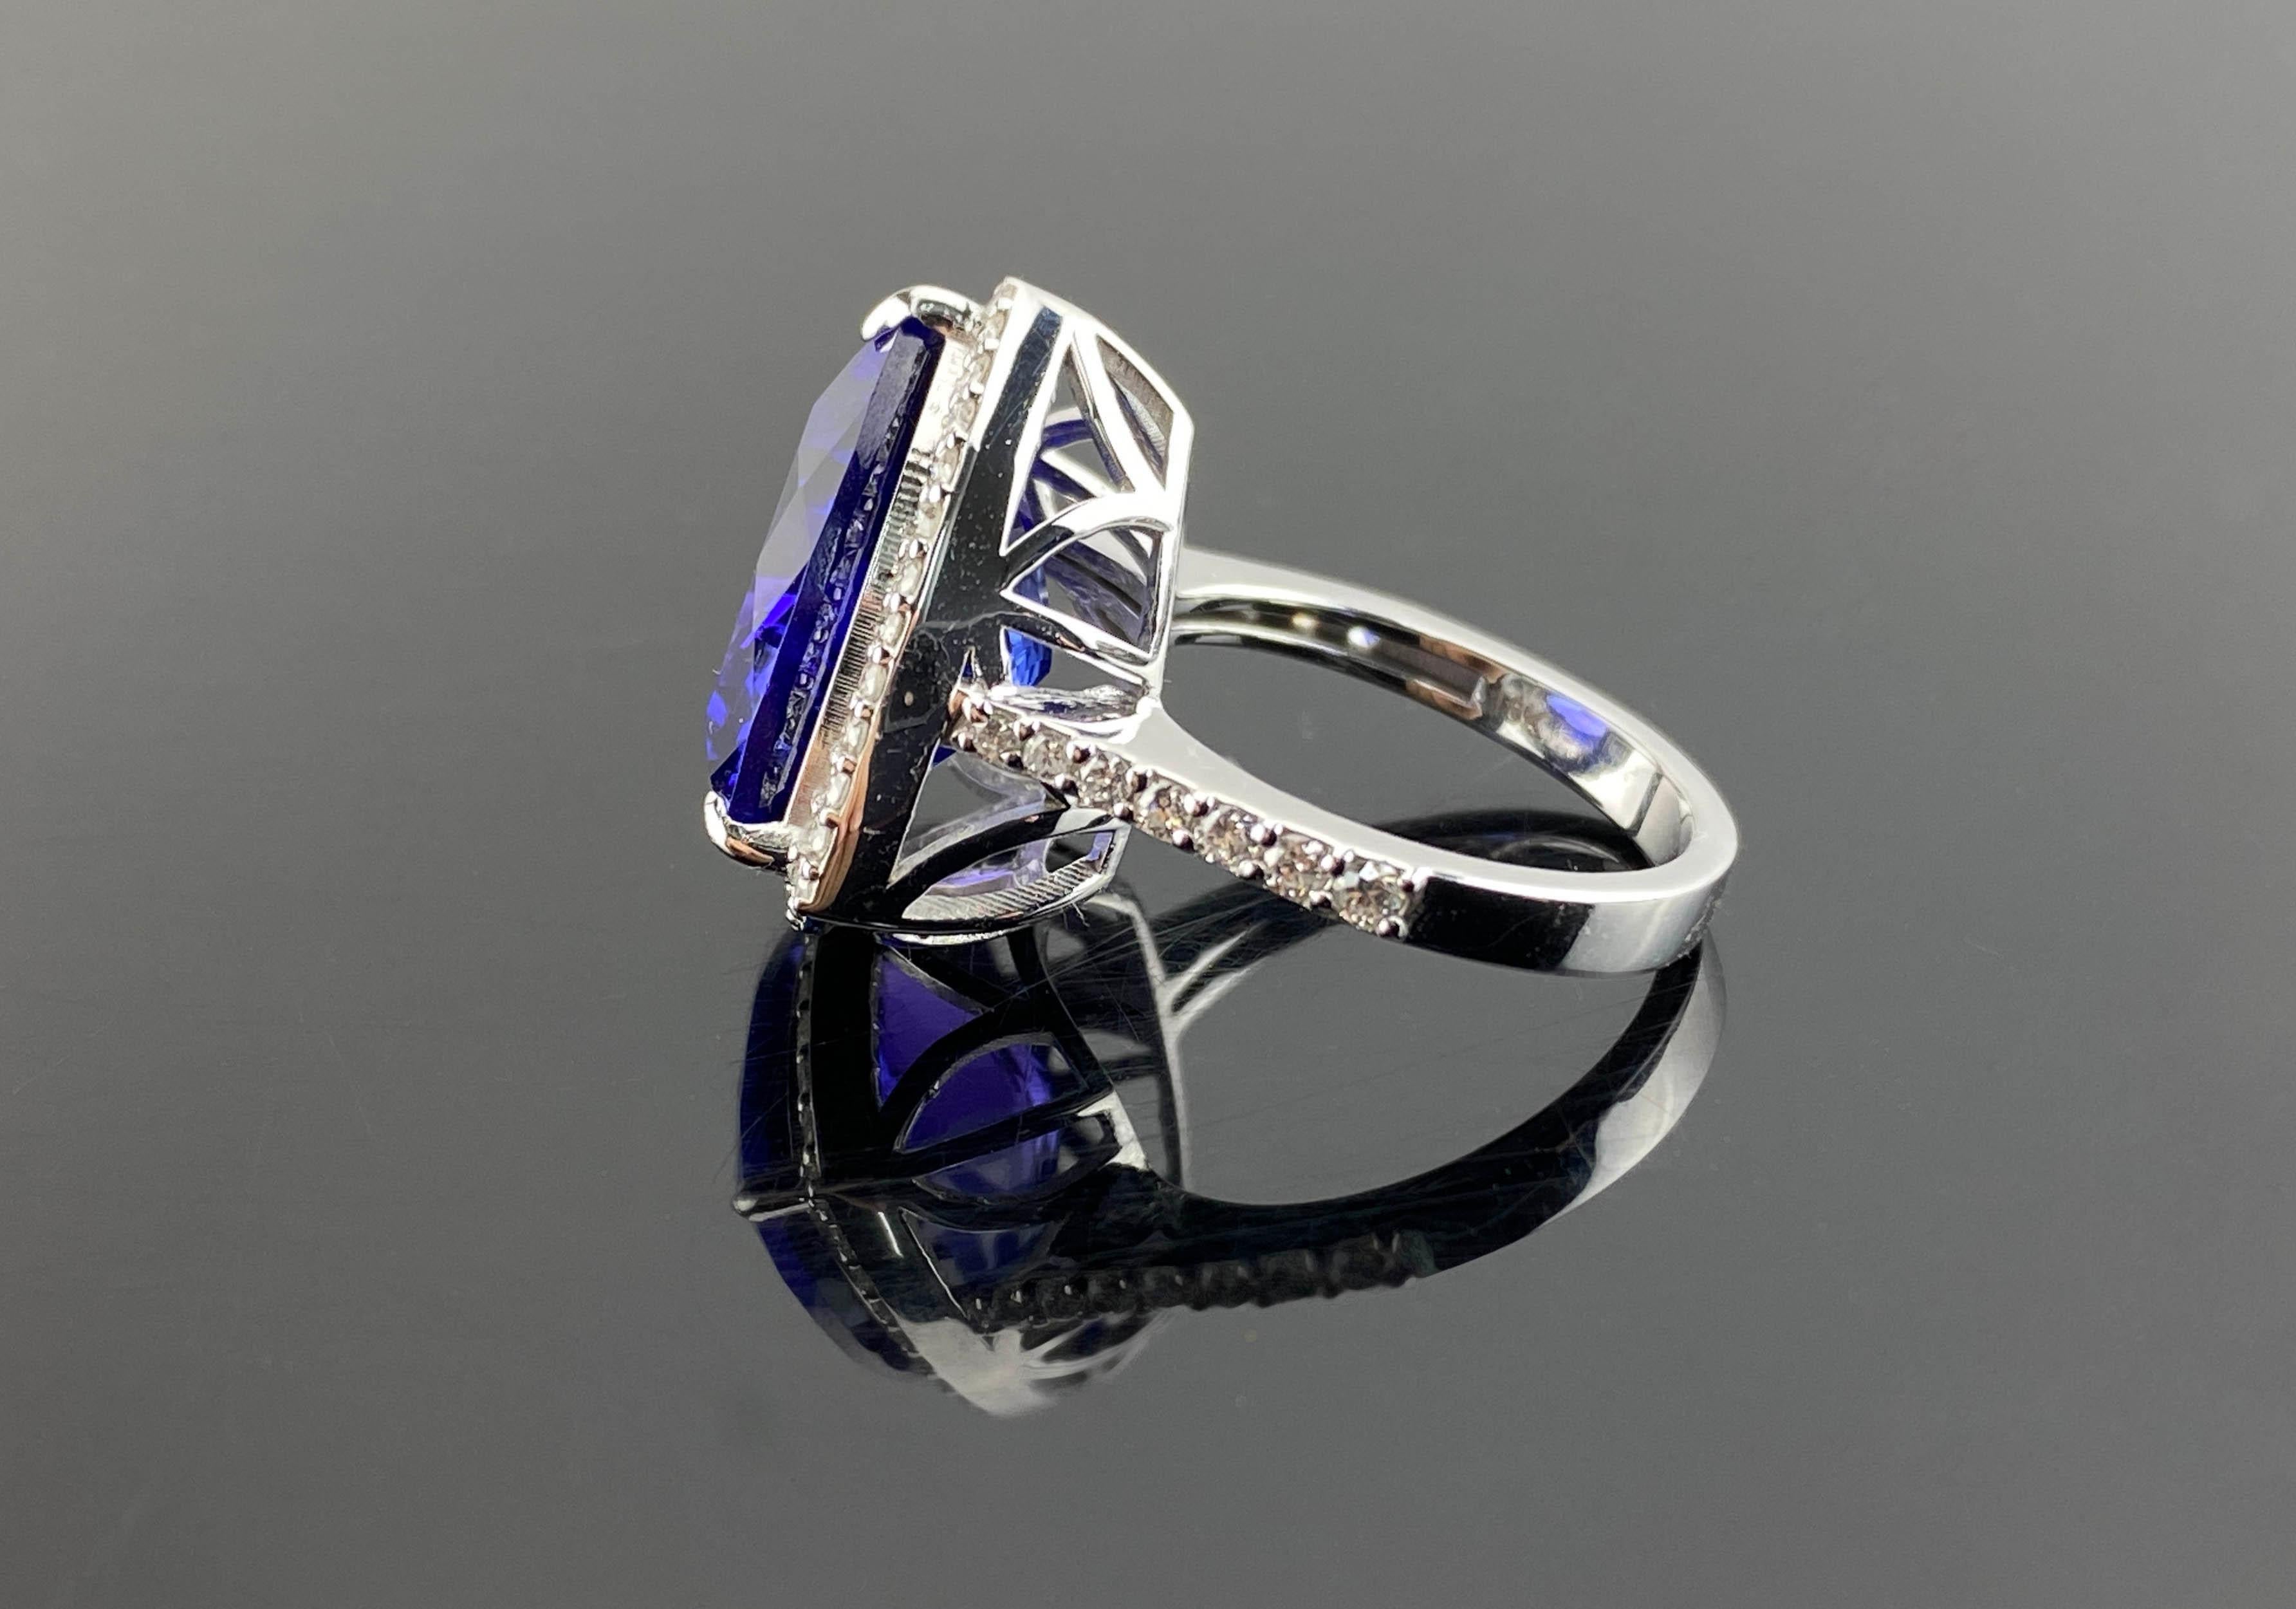 12.54 Carat Trillion Cut Tanzanite and Diamond Cocktail Ring Set in White Gold For Sale 6